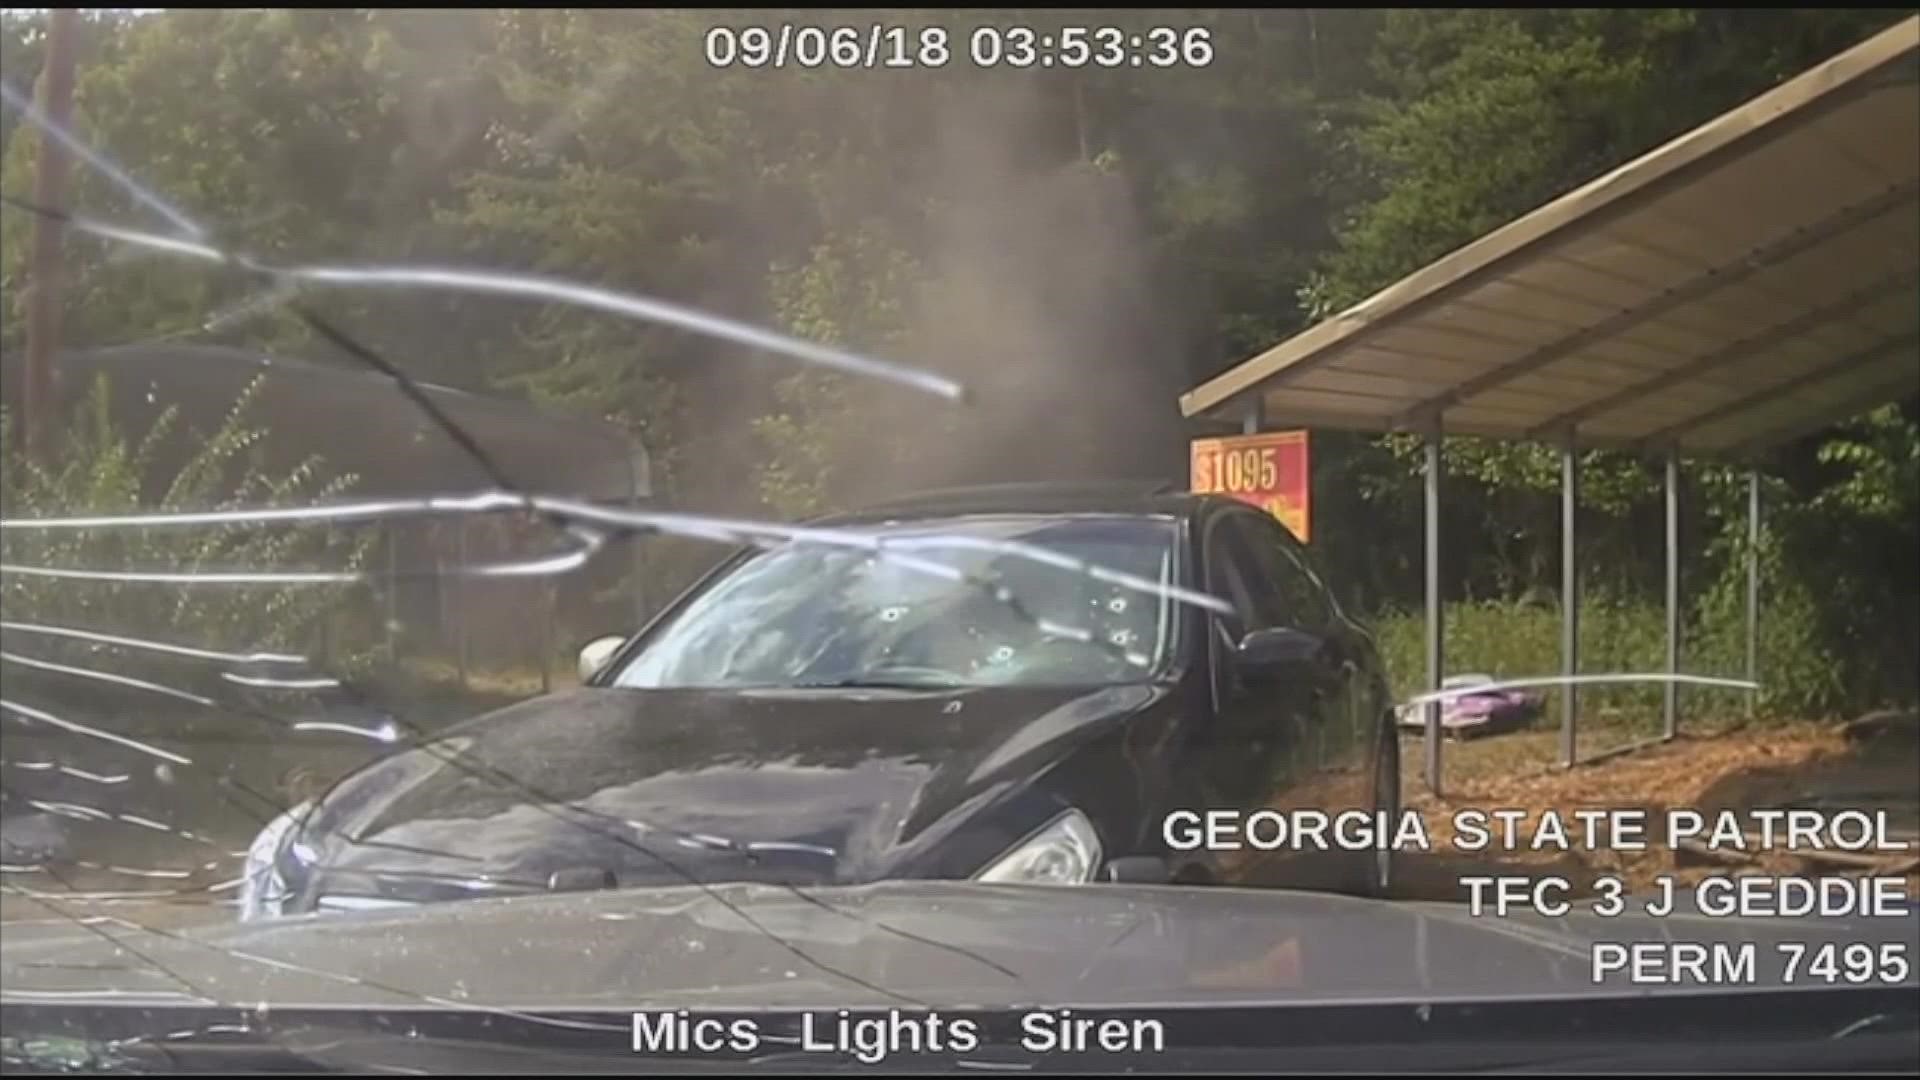 Many incidents involving GSP troopers happen away from the view of the dashboard camera.